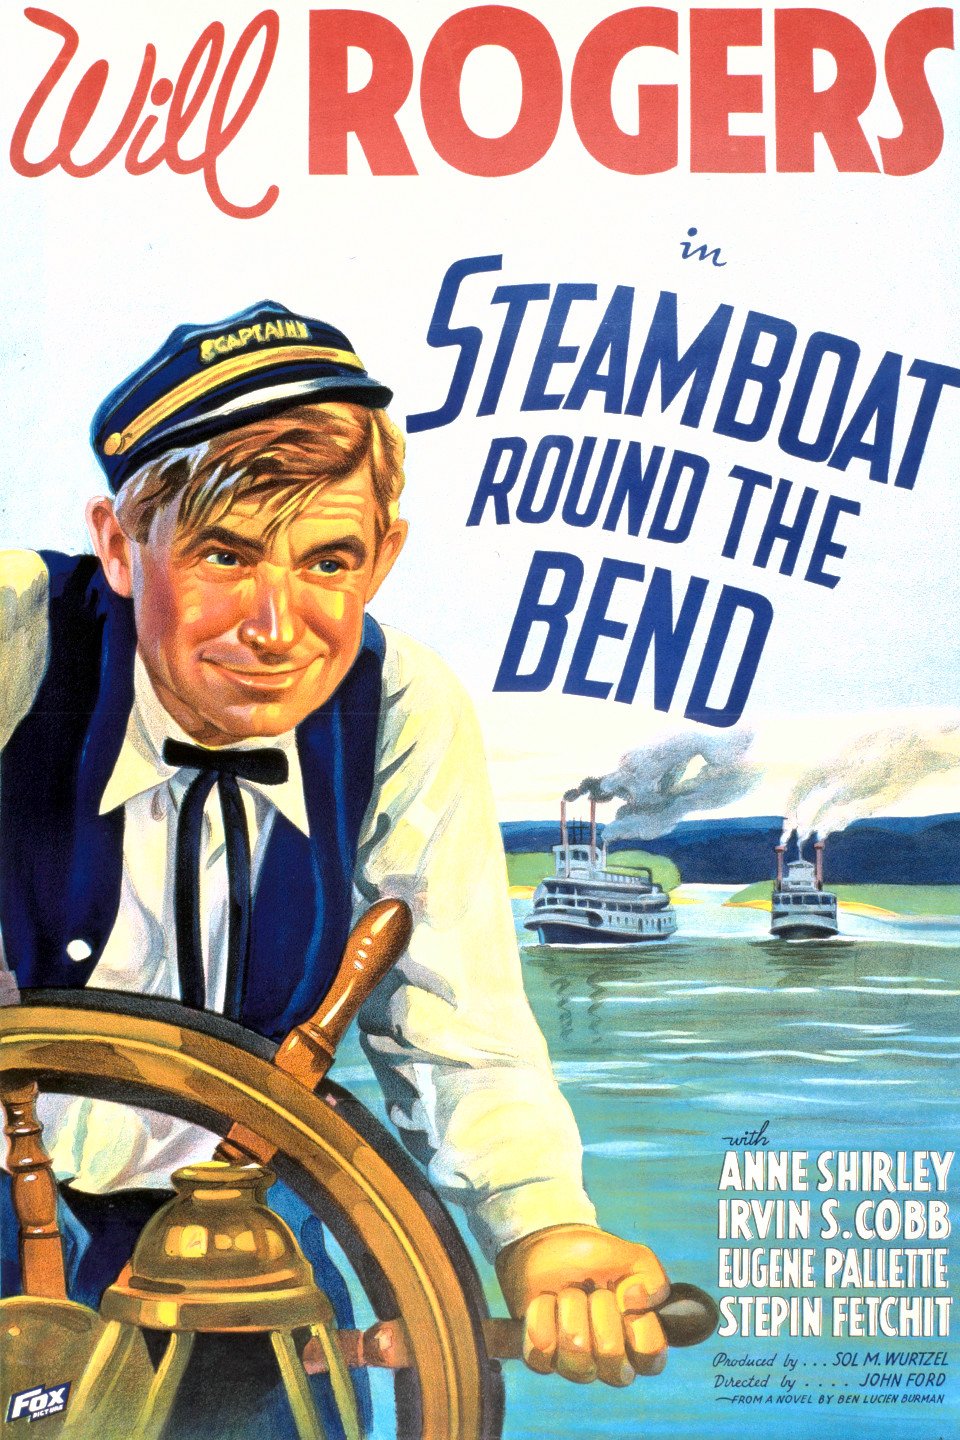 Poster of the movie Steamboat Round the Bend